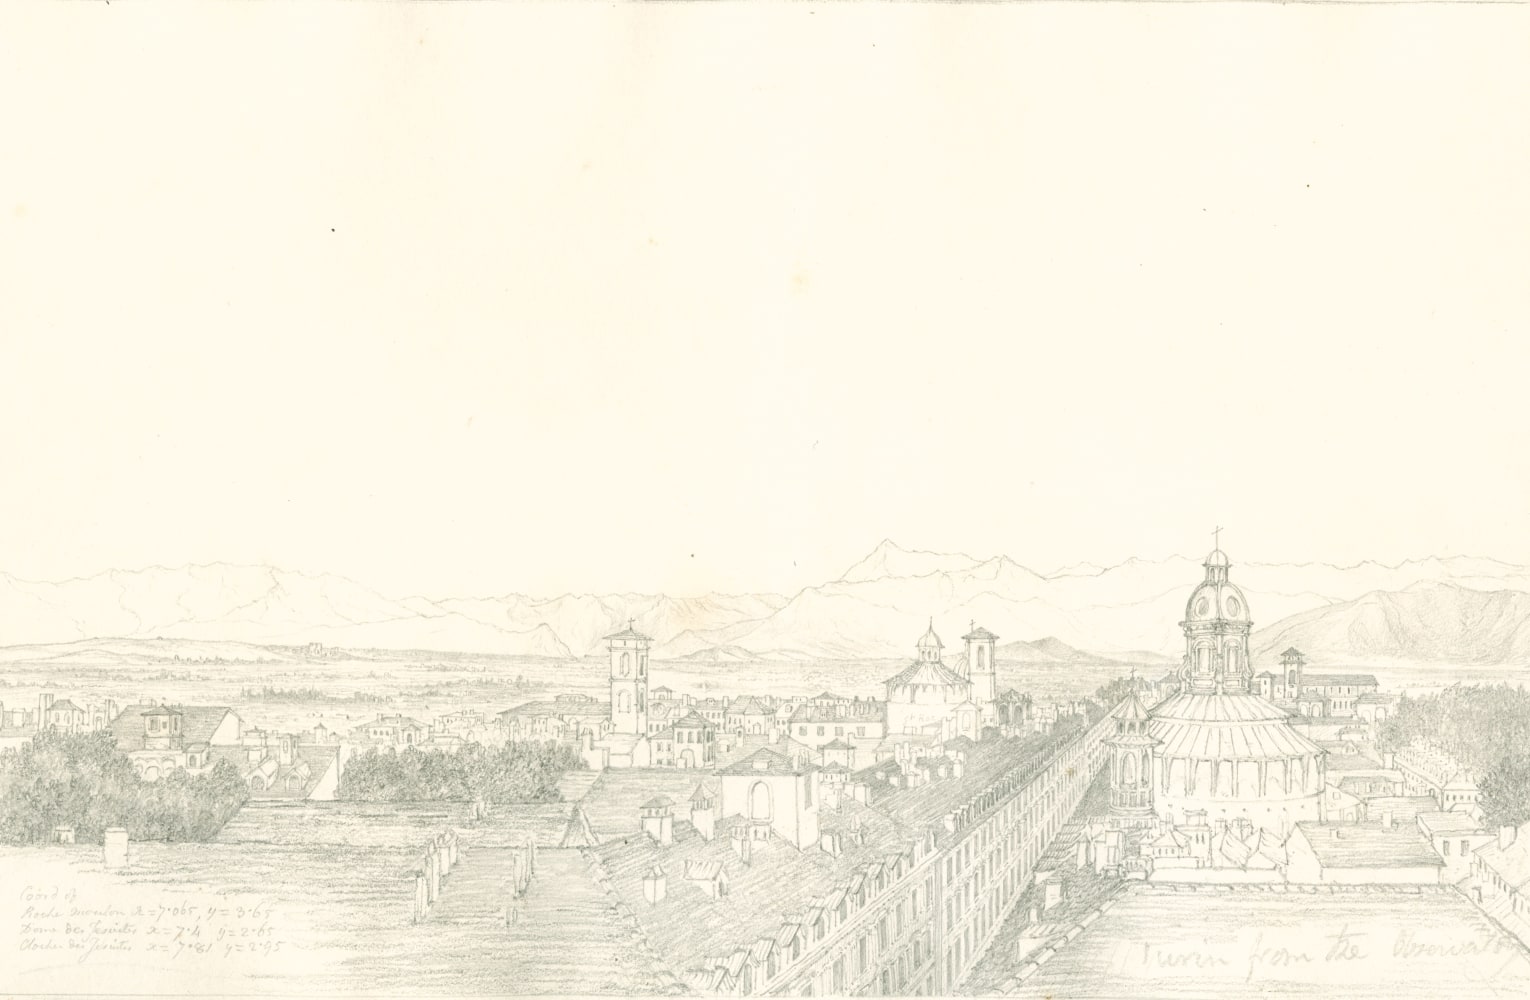 Sir John Frederick William HERSCHEL (English, 1792-1872) &quot;No 351 Turin with the chain of the Alps. From the roof of the Observatory”, 1824 Camera lucida drawing, pencil on paper 20.2 x 31.0 cm on 25.2 x 38.6 cm paper Numbered, signed, dated and titled “No 351 / JFW Herchel del. Cam. Luc. / 1824 / Turin with the chain of the Alps. From the roof of the Observatory.” in ink in border, and “Coord of / Roche Moulon x = 7.065, y = 3.65 / Dome des Jesuites x = 7.4, y = 2.65 / Clocher des Jesuites x = 7.81, y = 2.95 / Turin from the Observatory” in pencil. Inscribed “Turin from Observatory” in pencil on verso